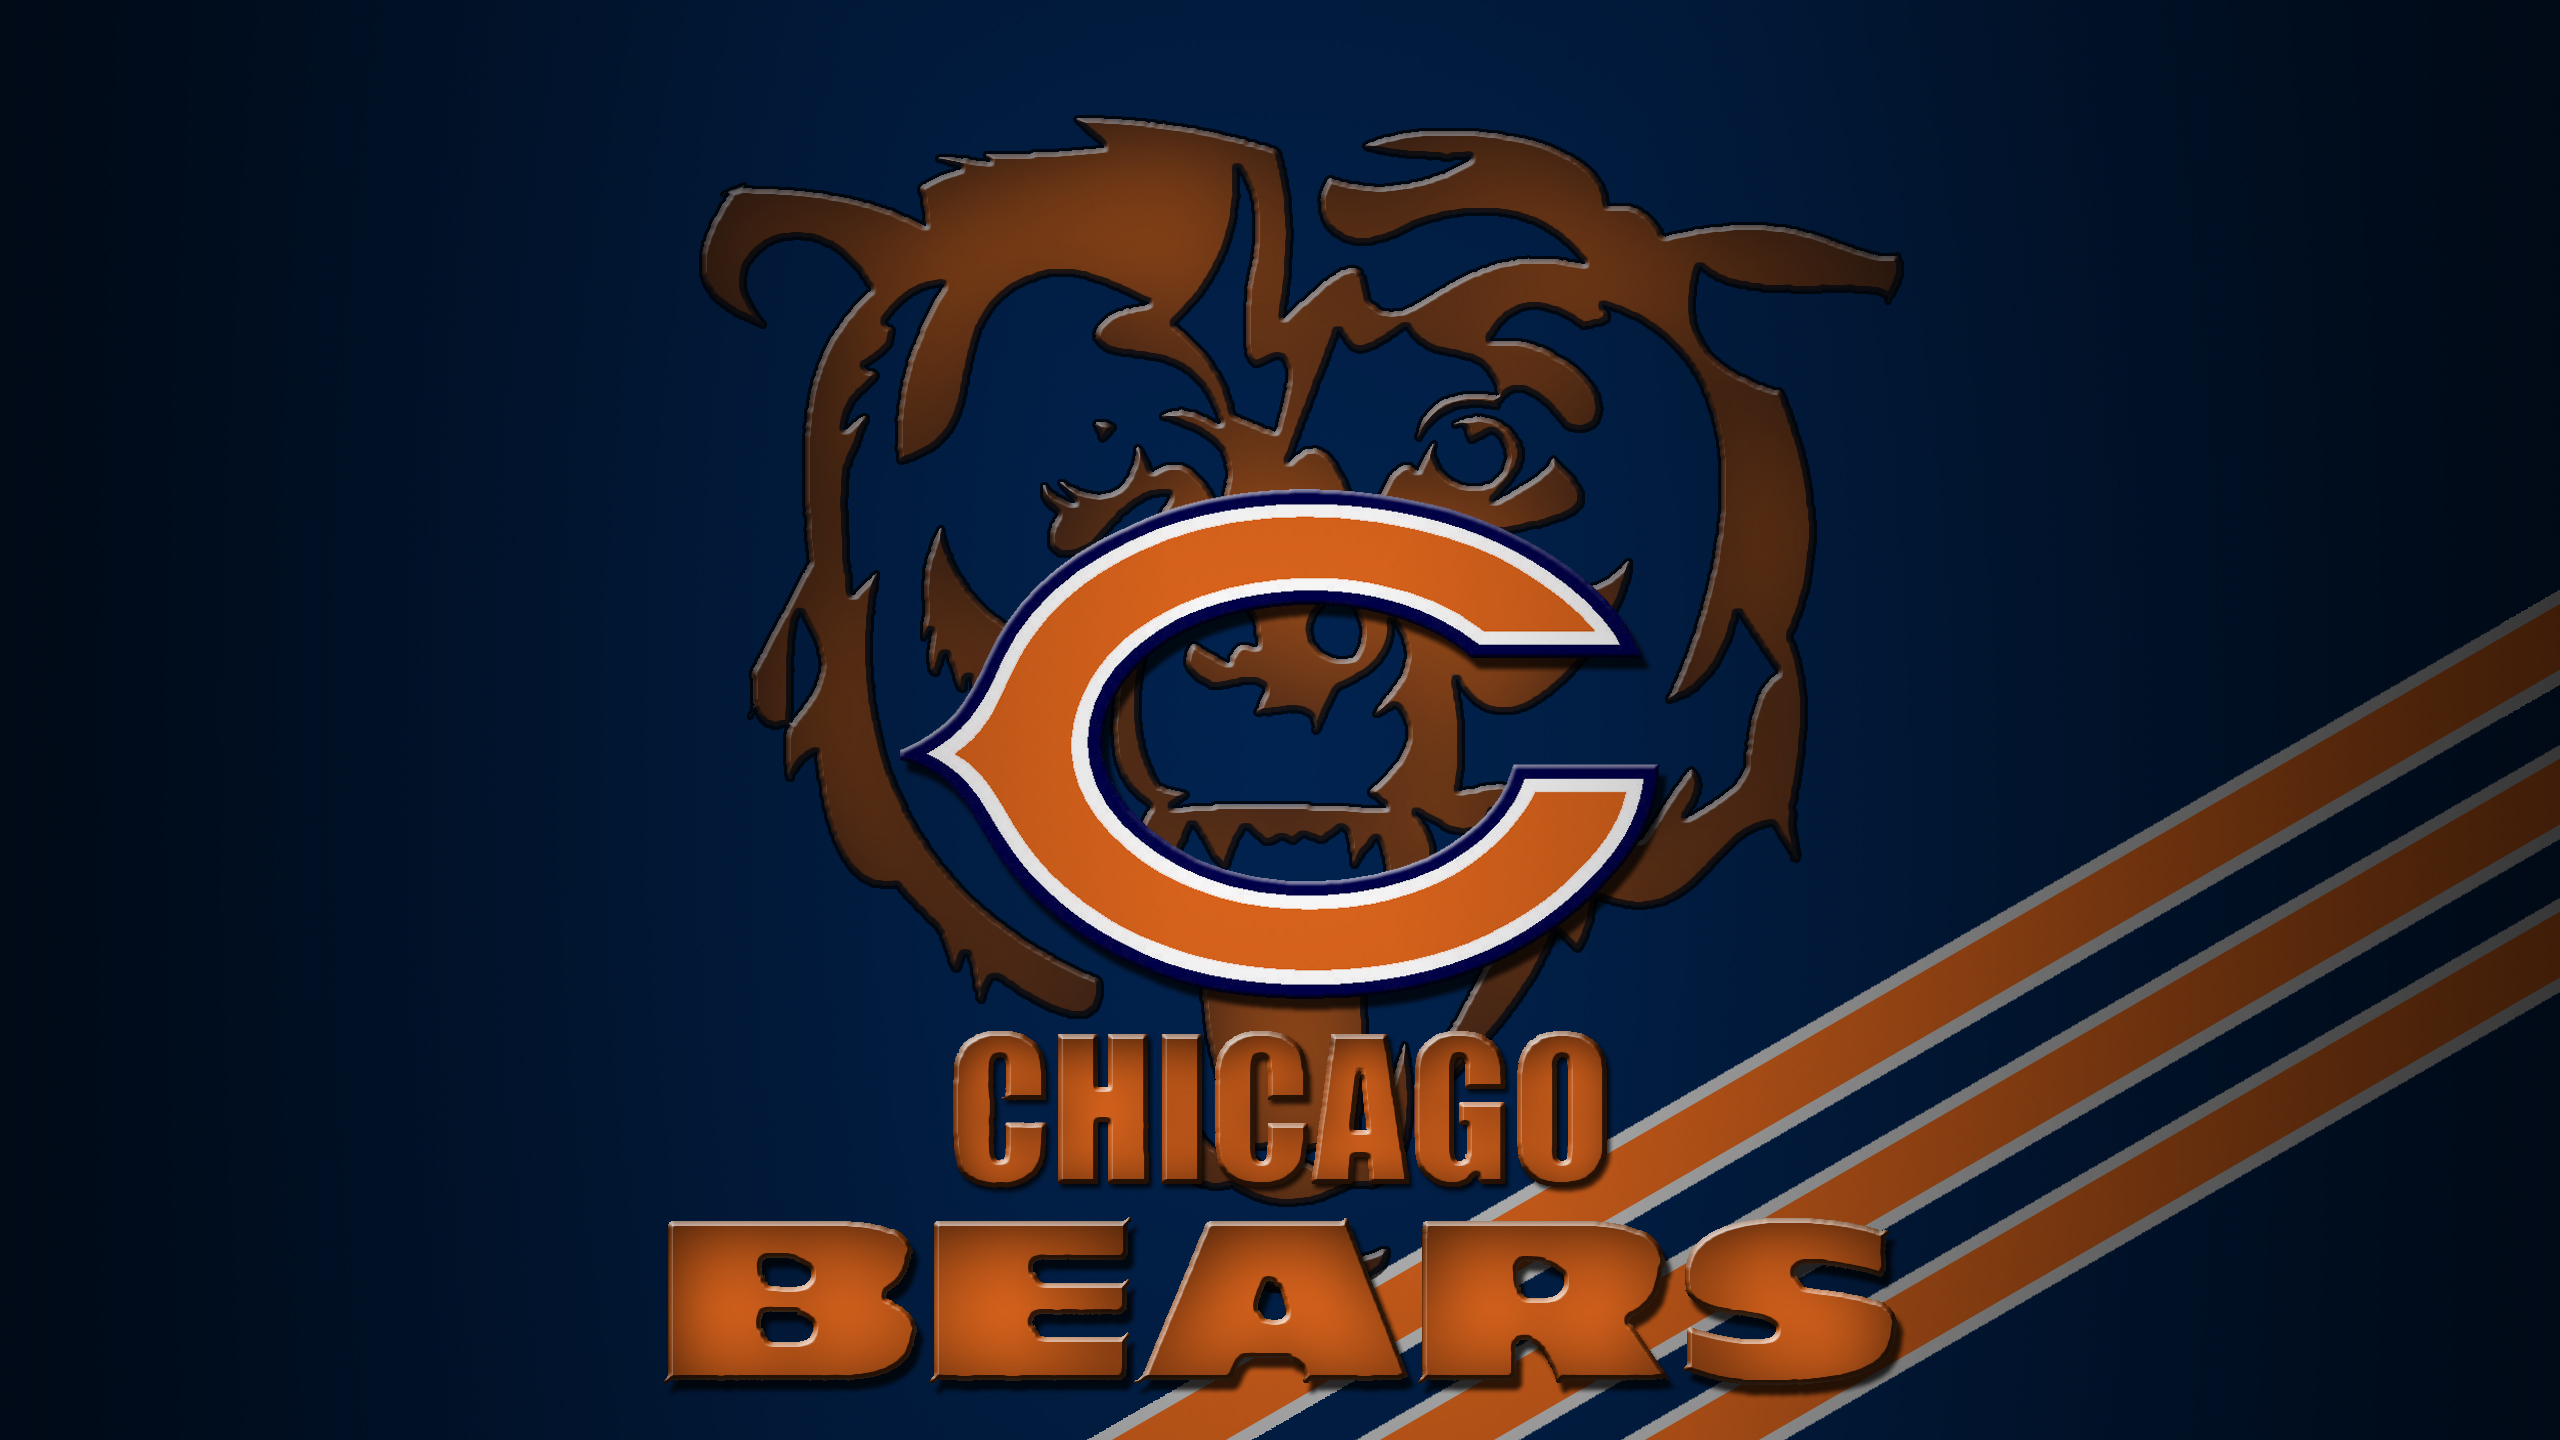 Chicago Bears By Beaware8